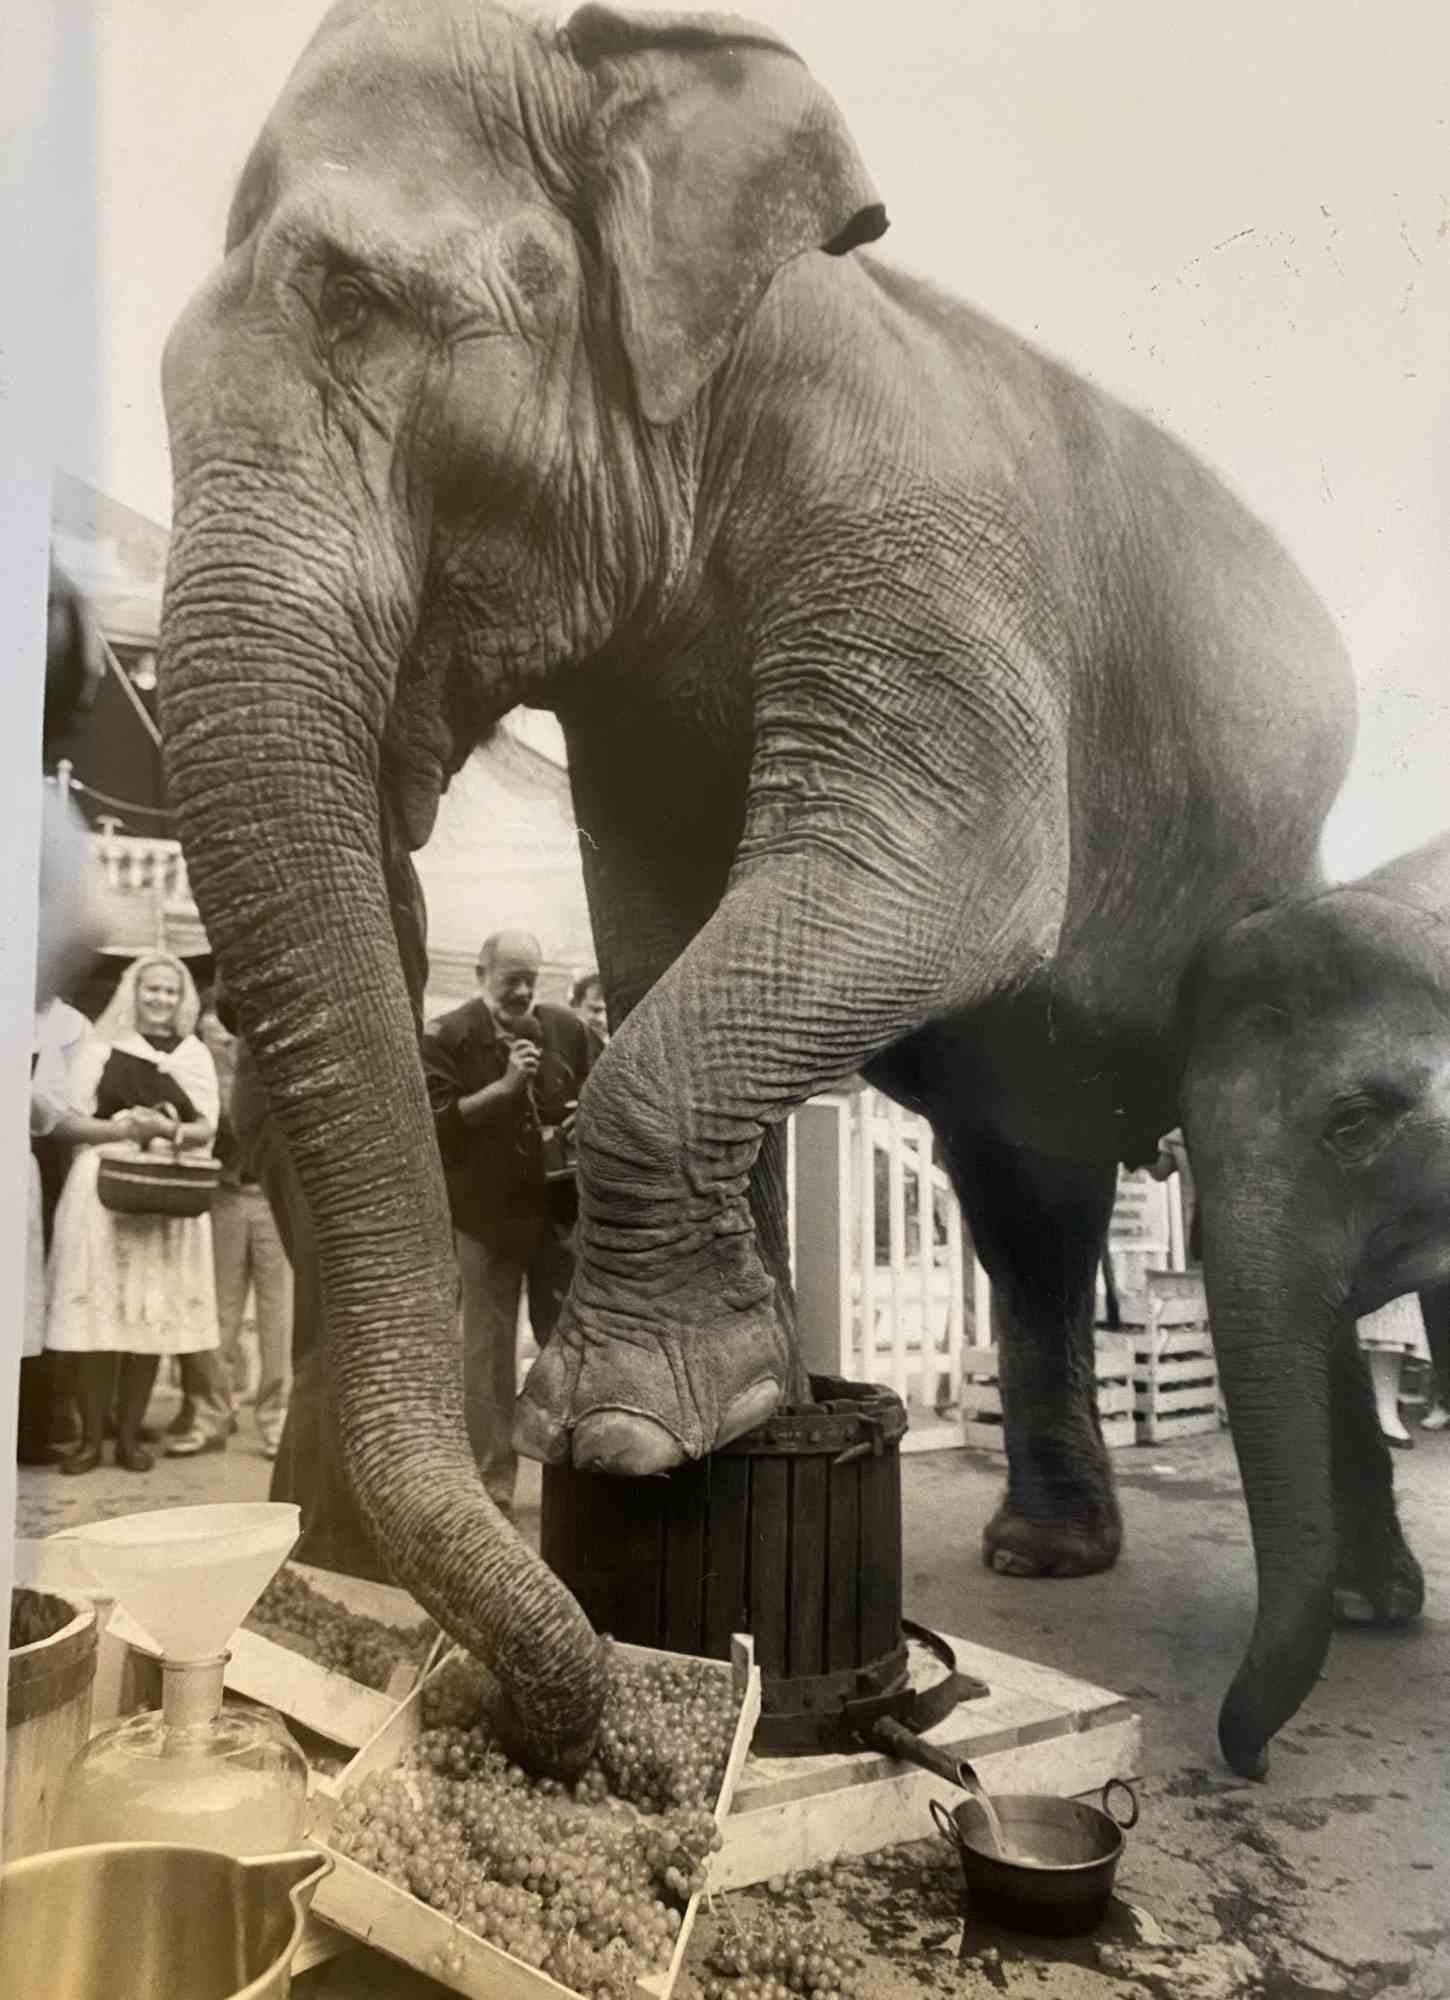 Unknown Figurative Photograph - Elephant Eating Grapes - Photograph - 1960s